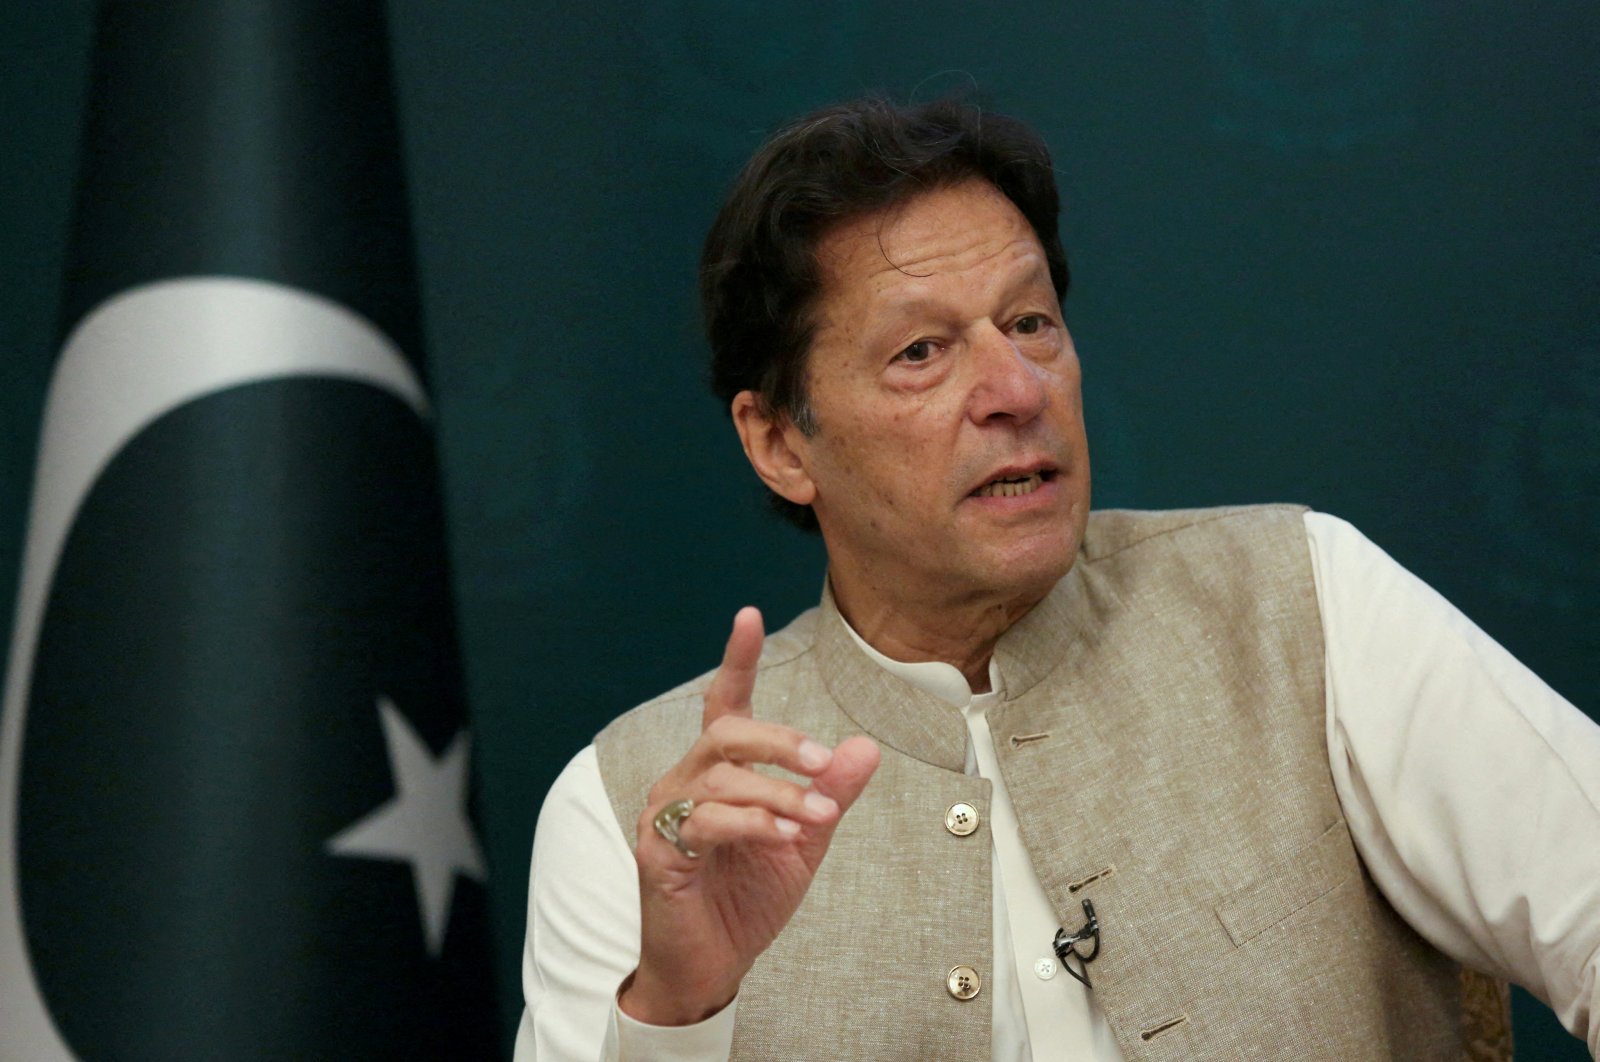 Pakistani Prime Minister Imran Khan speaks during an interview with Reuters in Islamabad, Pakistan, June 4, 2021. (Reuters Photo)